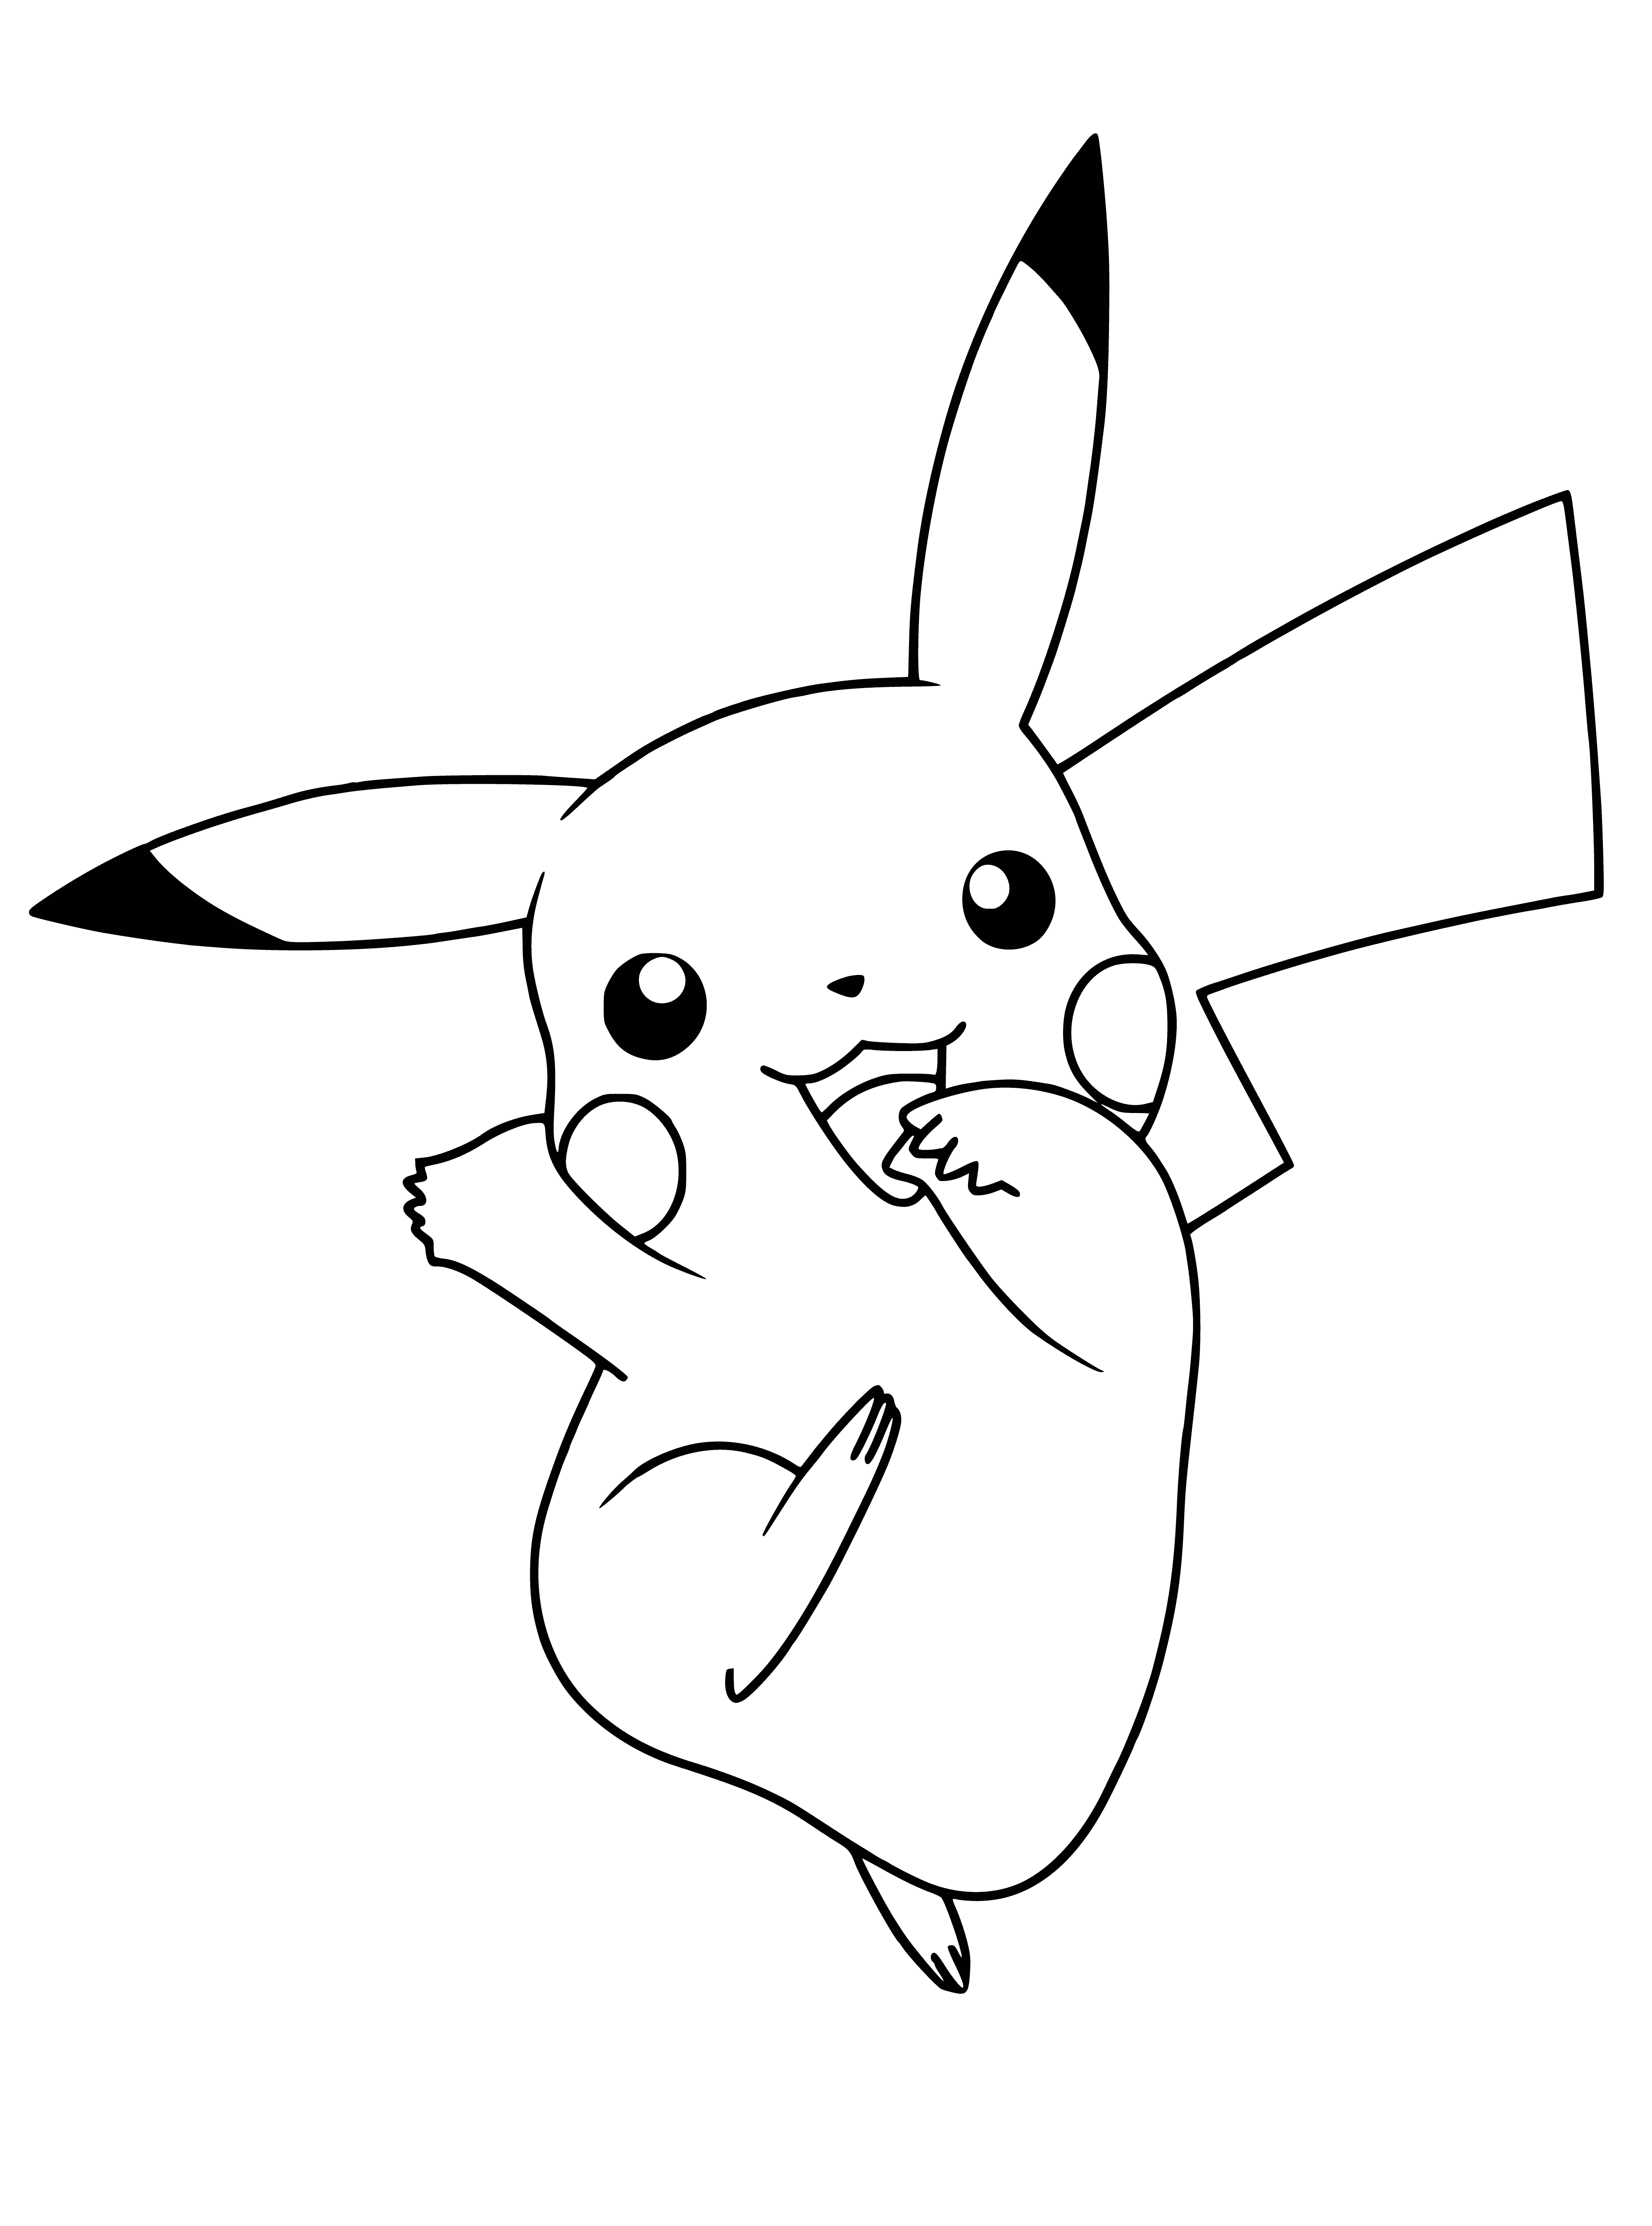 coloring page: Pikachu is an electric-type Pokémon with yellow fur, black marking, and a lightning bolt-shaped tail. It has red cheeks.